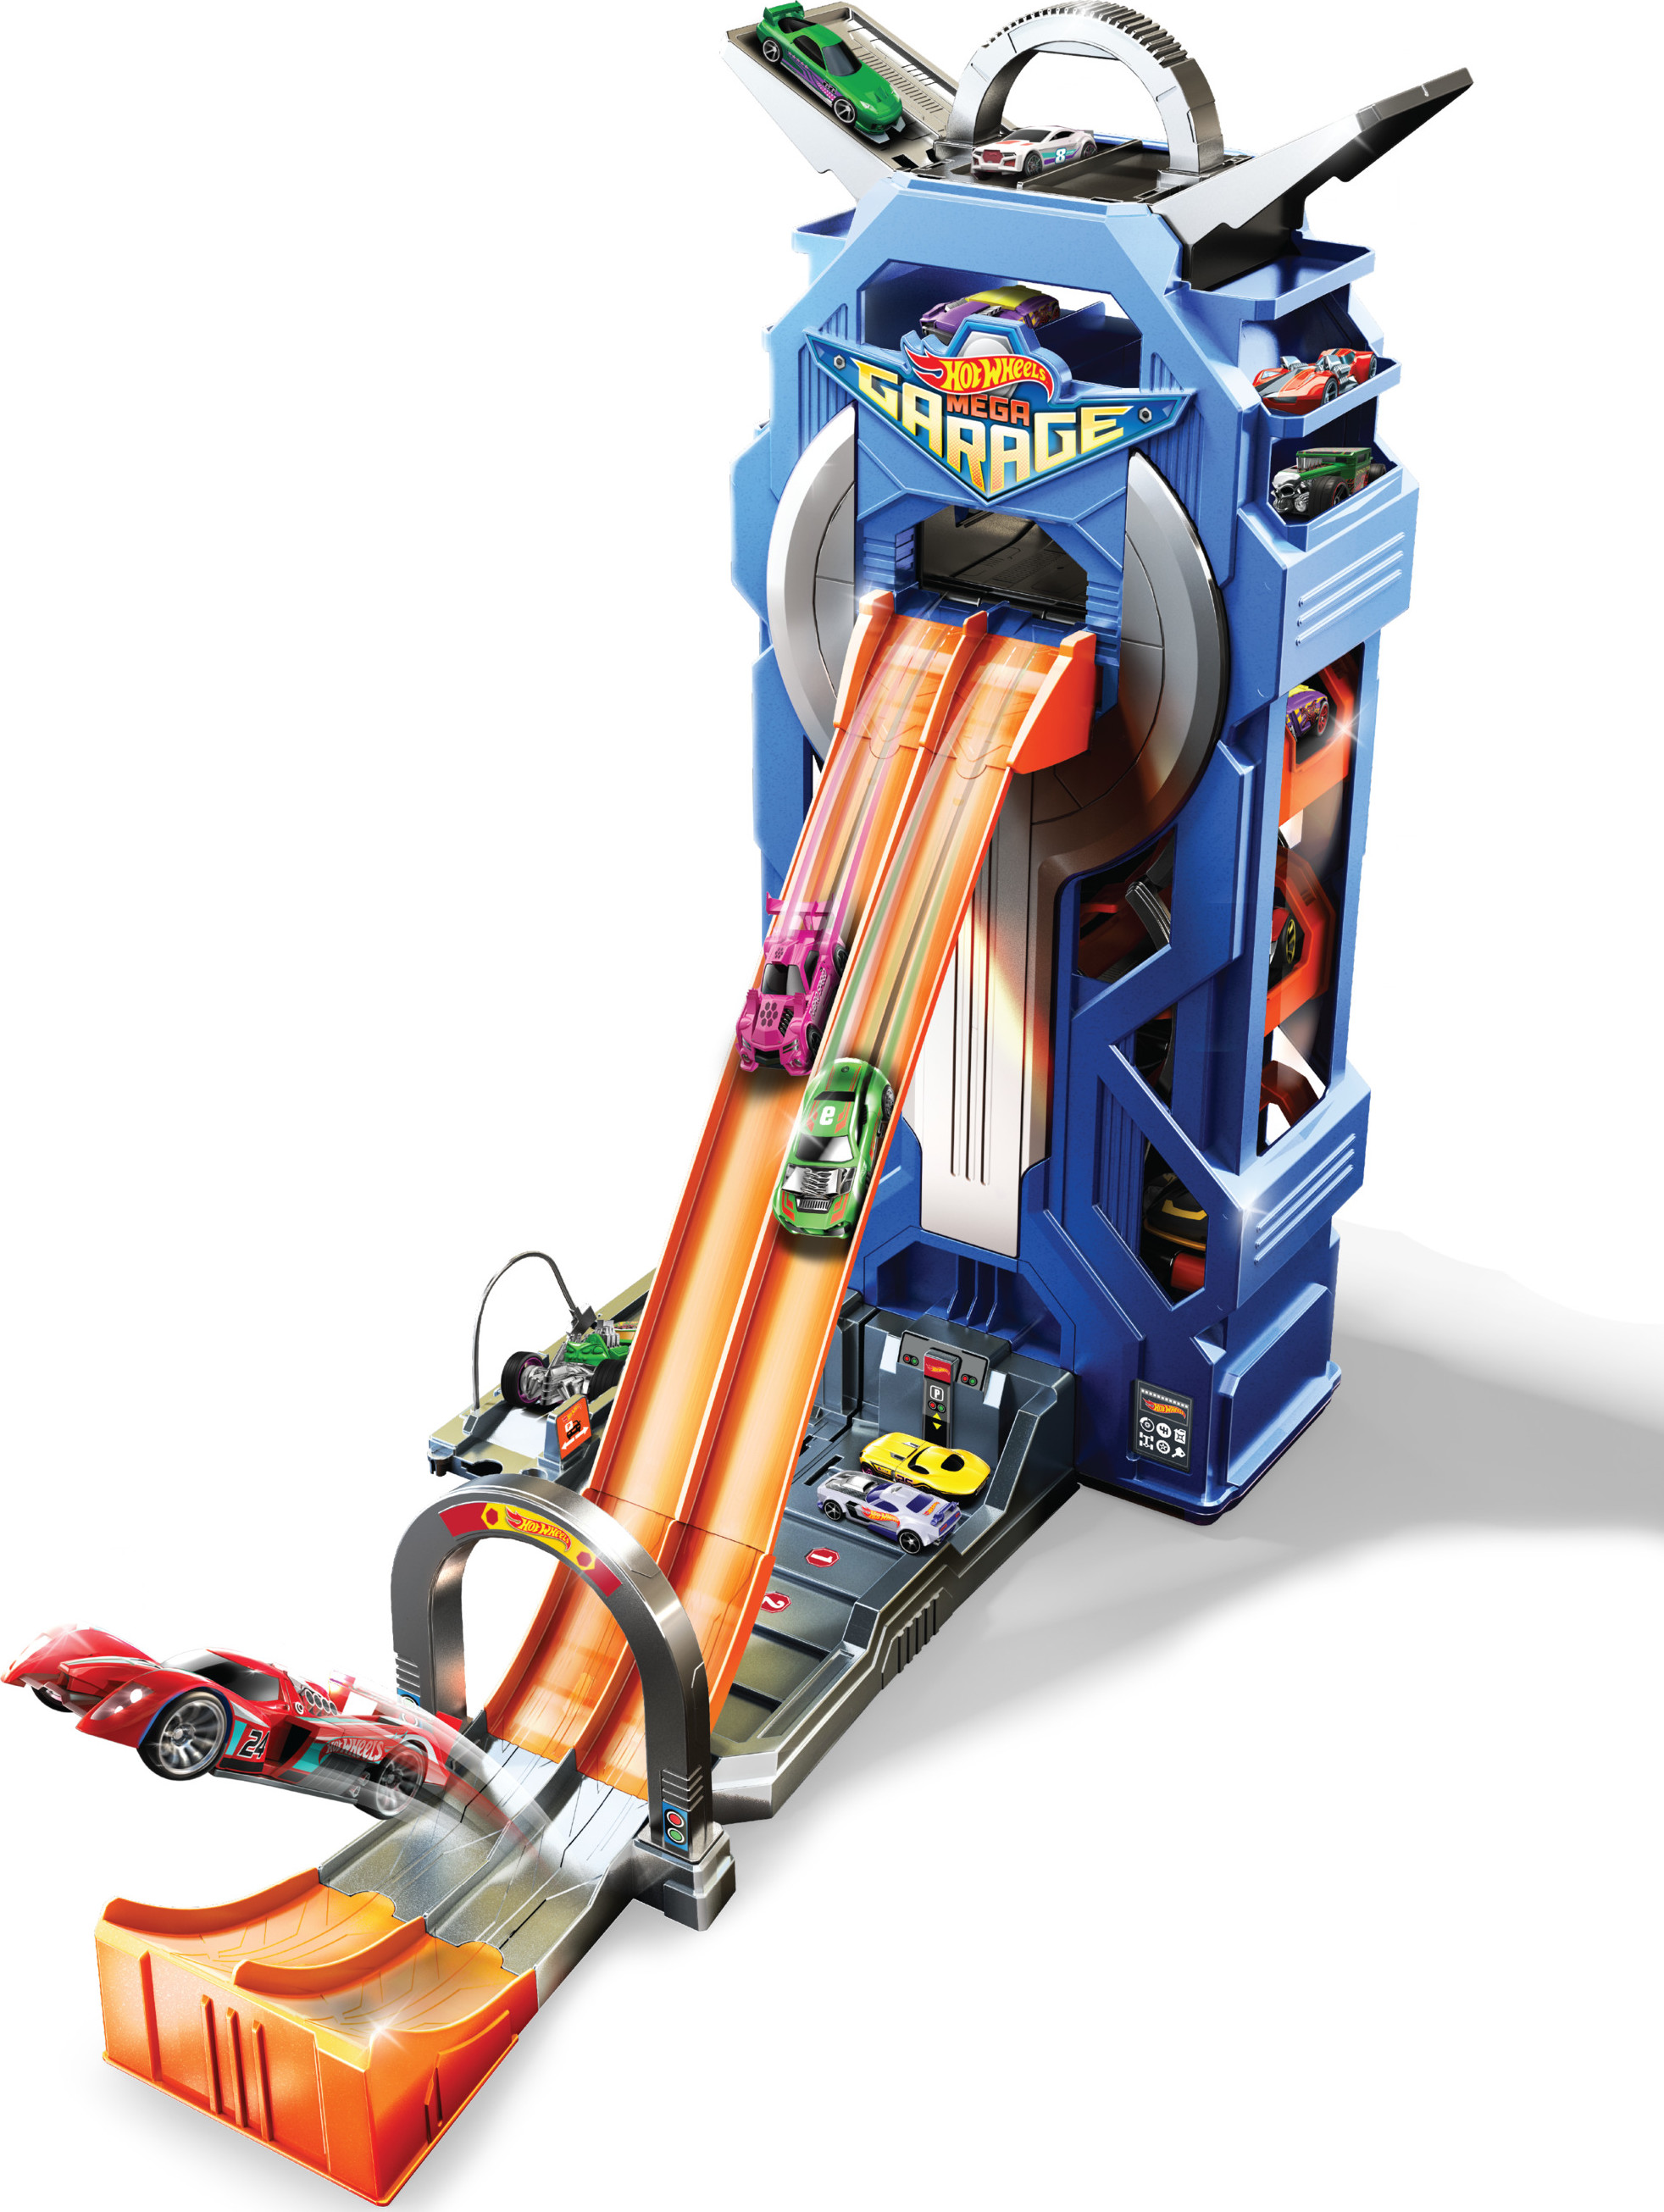 Hot Wheels Mega Garage Toy Car Race Track & Playset, Stores 35+ 1:64 Scale Vehicles - image 1 of 7